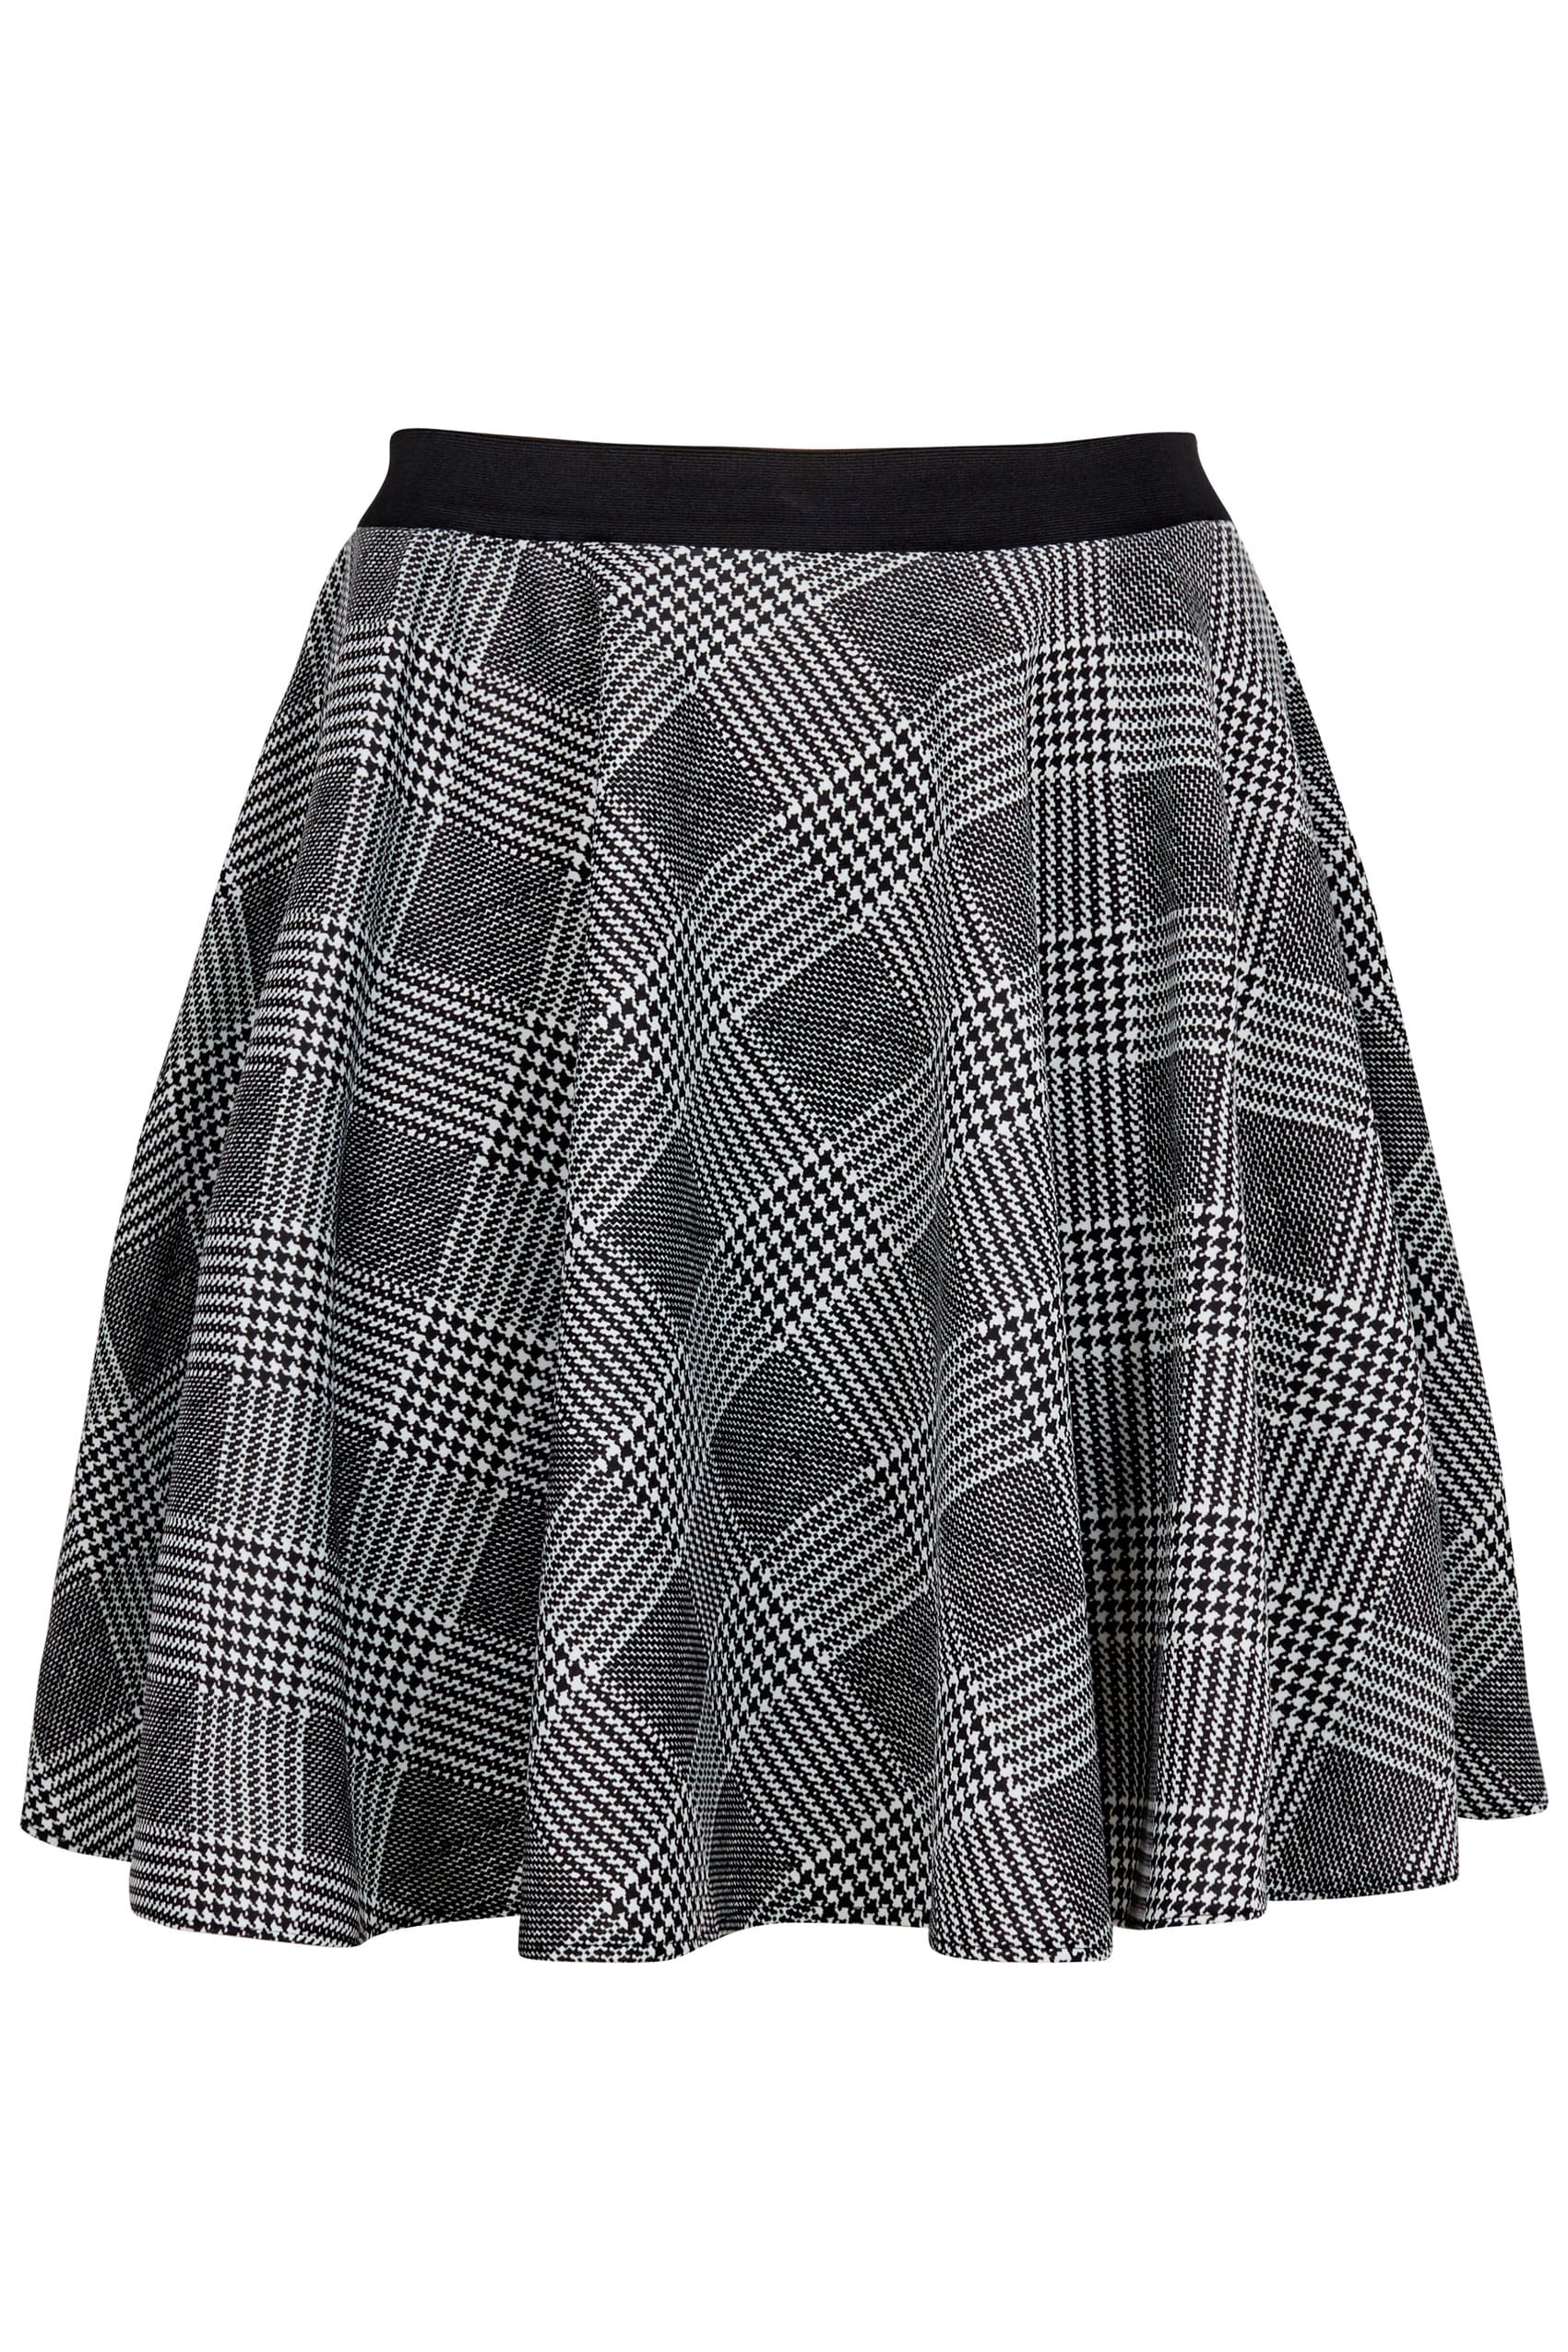 LIMITED COLLECTION Black & White Checked Skater Skirt, plus size 16 to 32